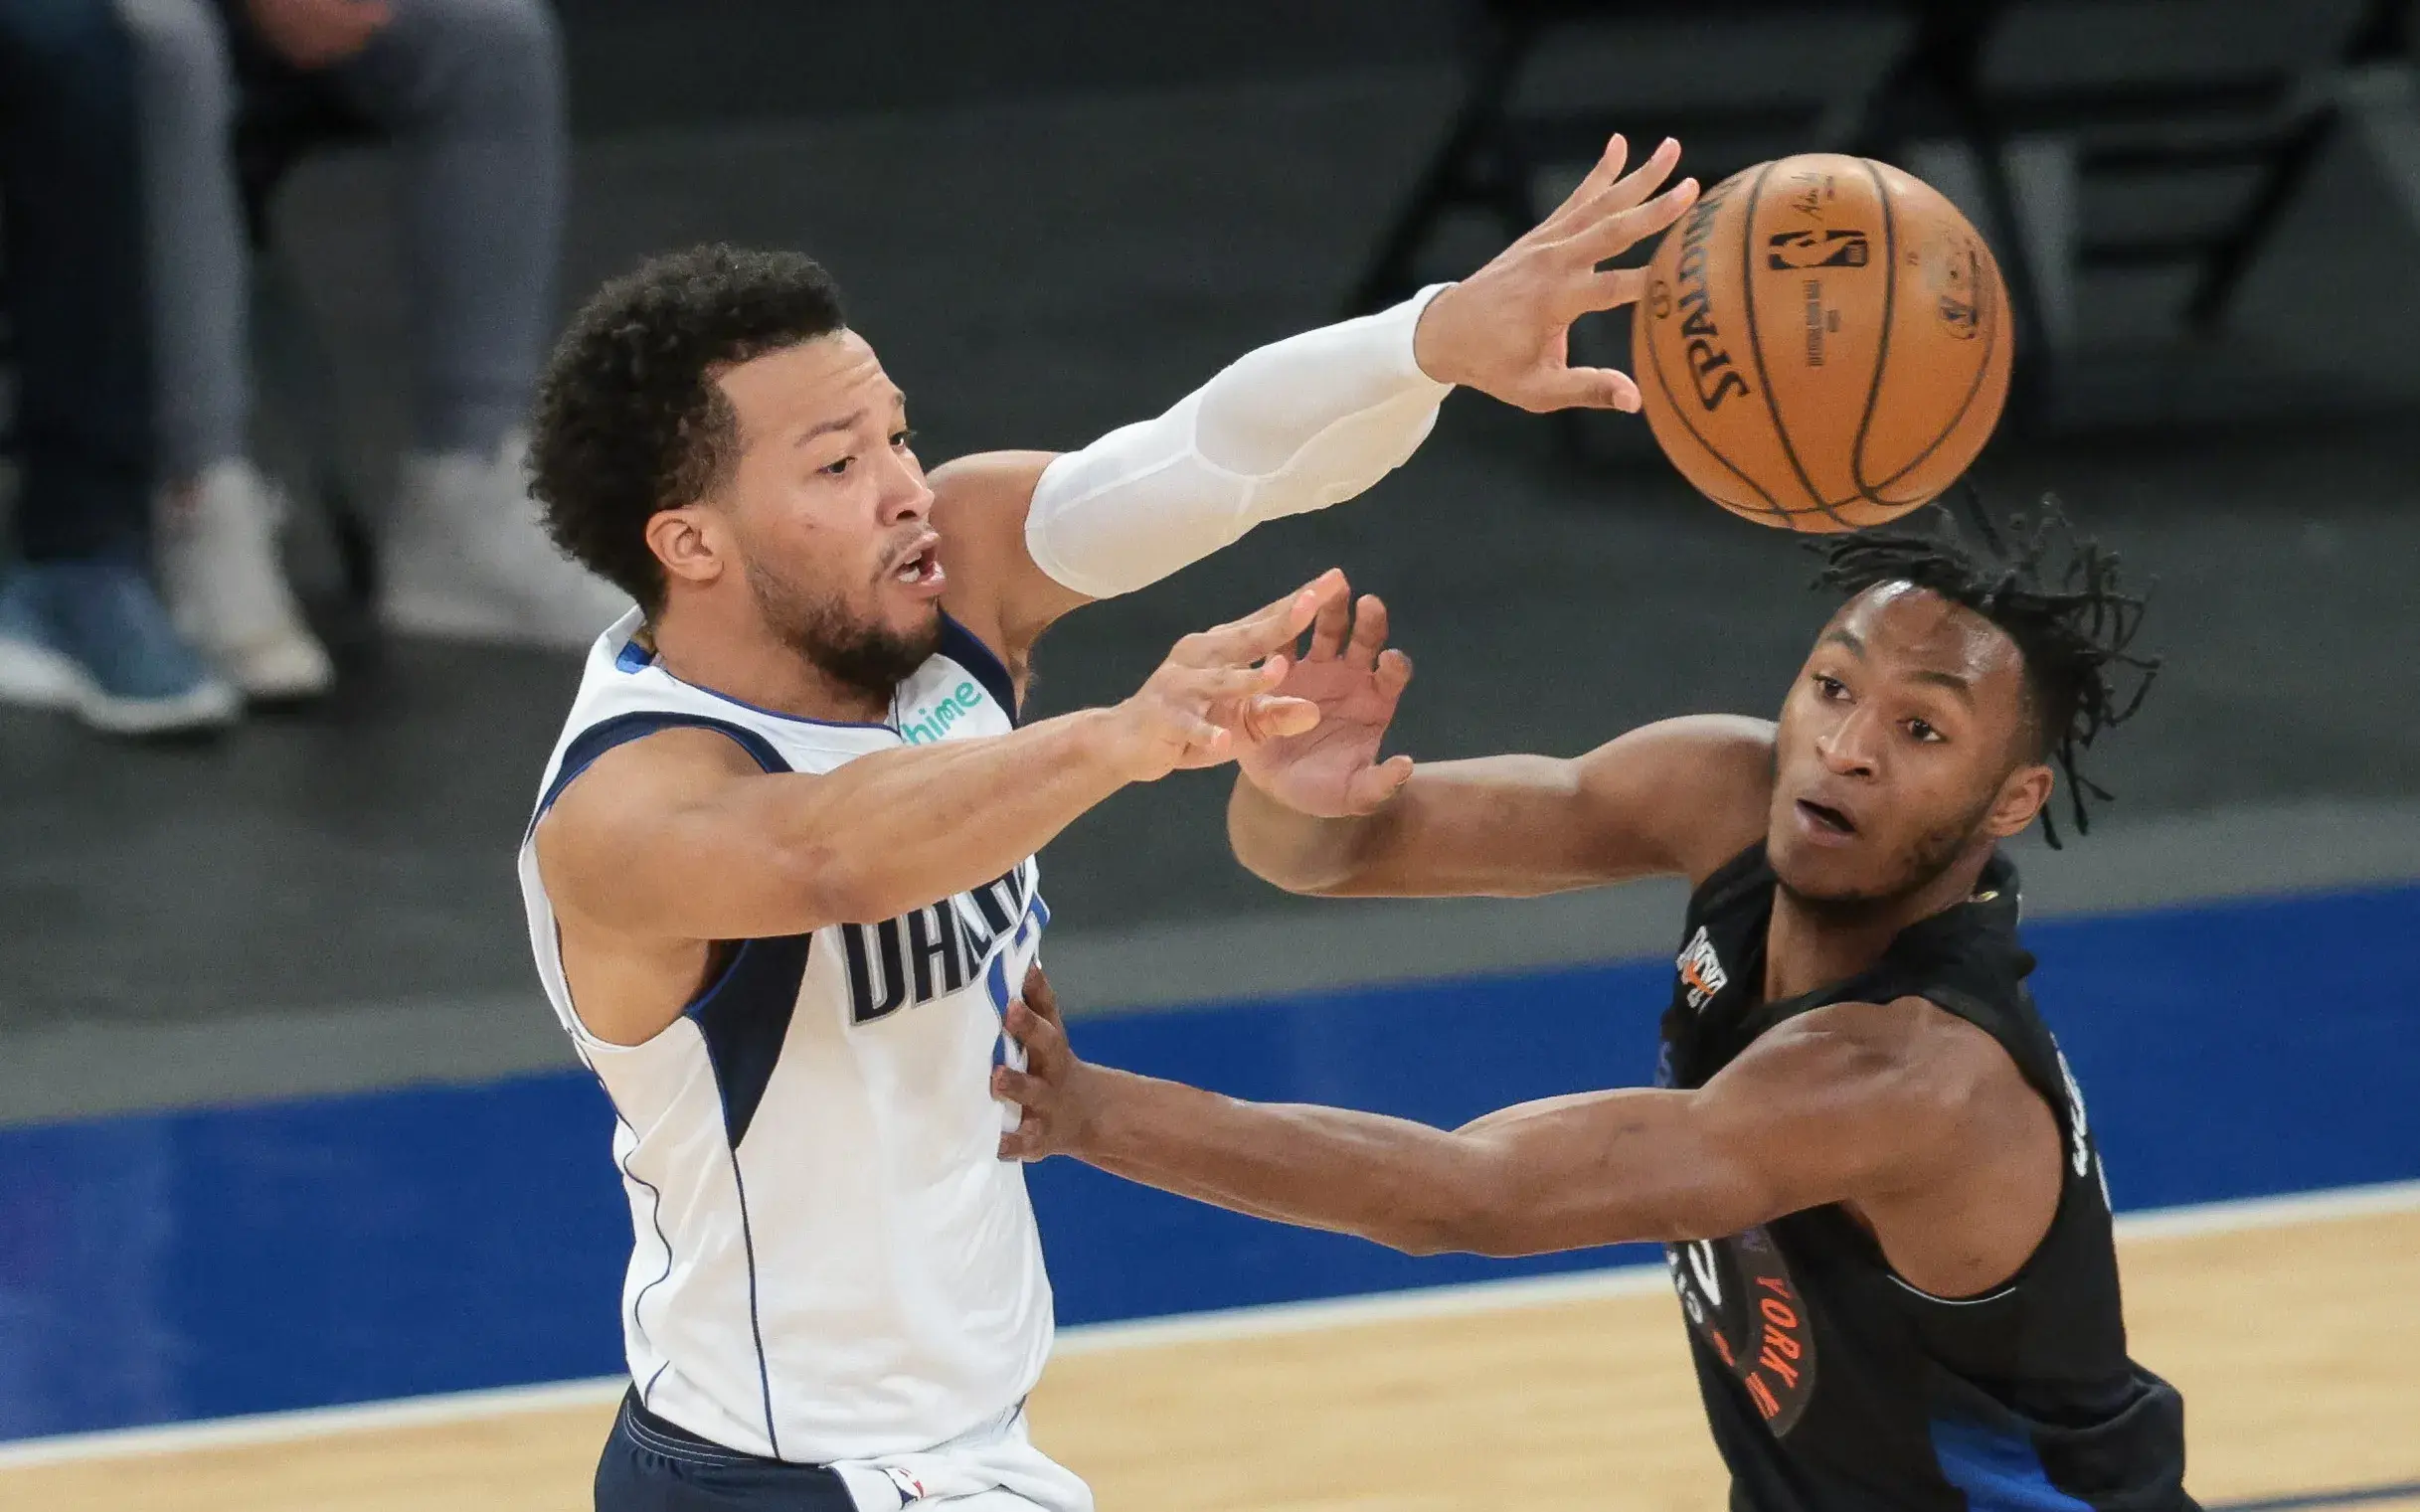 Apr 2, 2021; New York, New York, USA; Dallas Mavericks guard Jalen Brunson (13) passes the ball against New York Knicks guard Immanuel Quickley (5) during the second half at Madison Square Garden. Mandatory Credit: Vincent Carchietta-USA TODAY Sports / © Vincent Carchietta-USA TODAY Sports